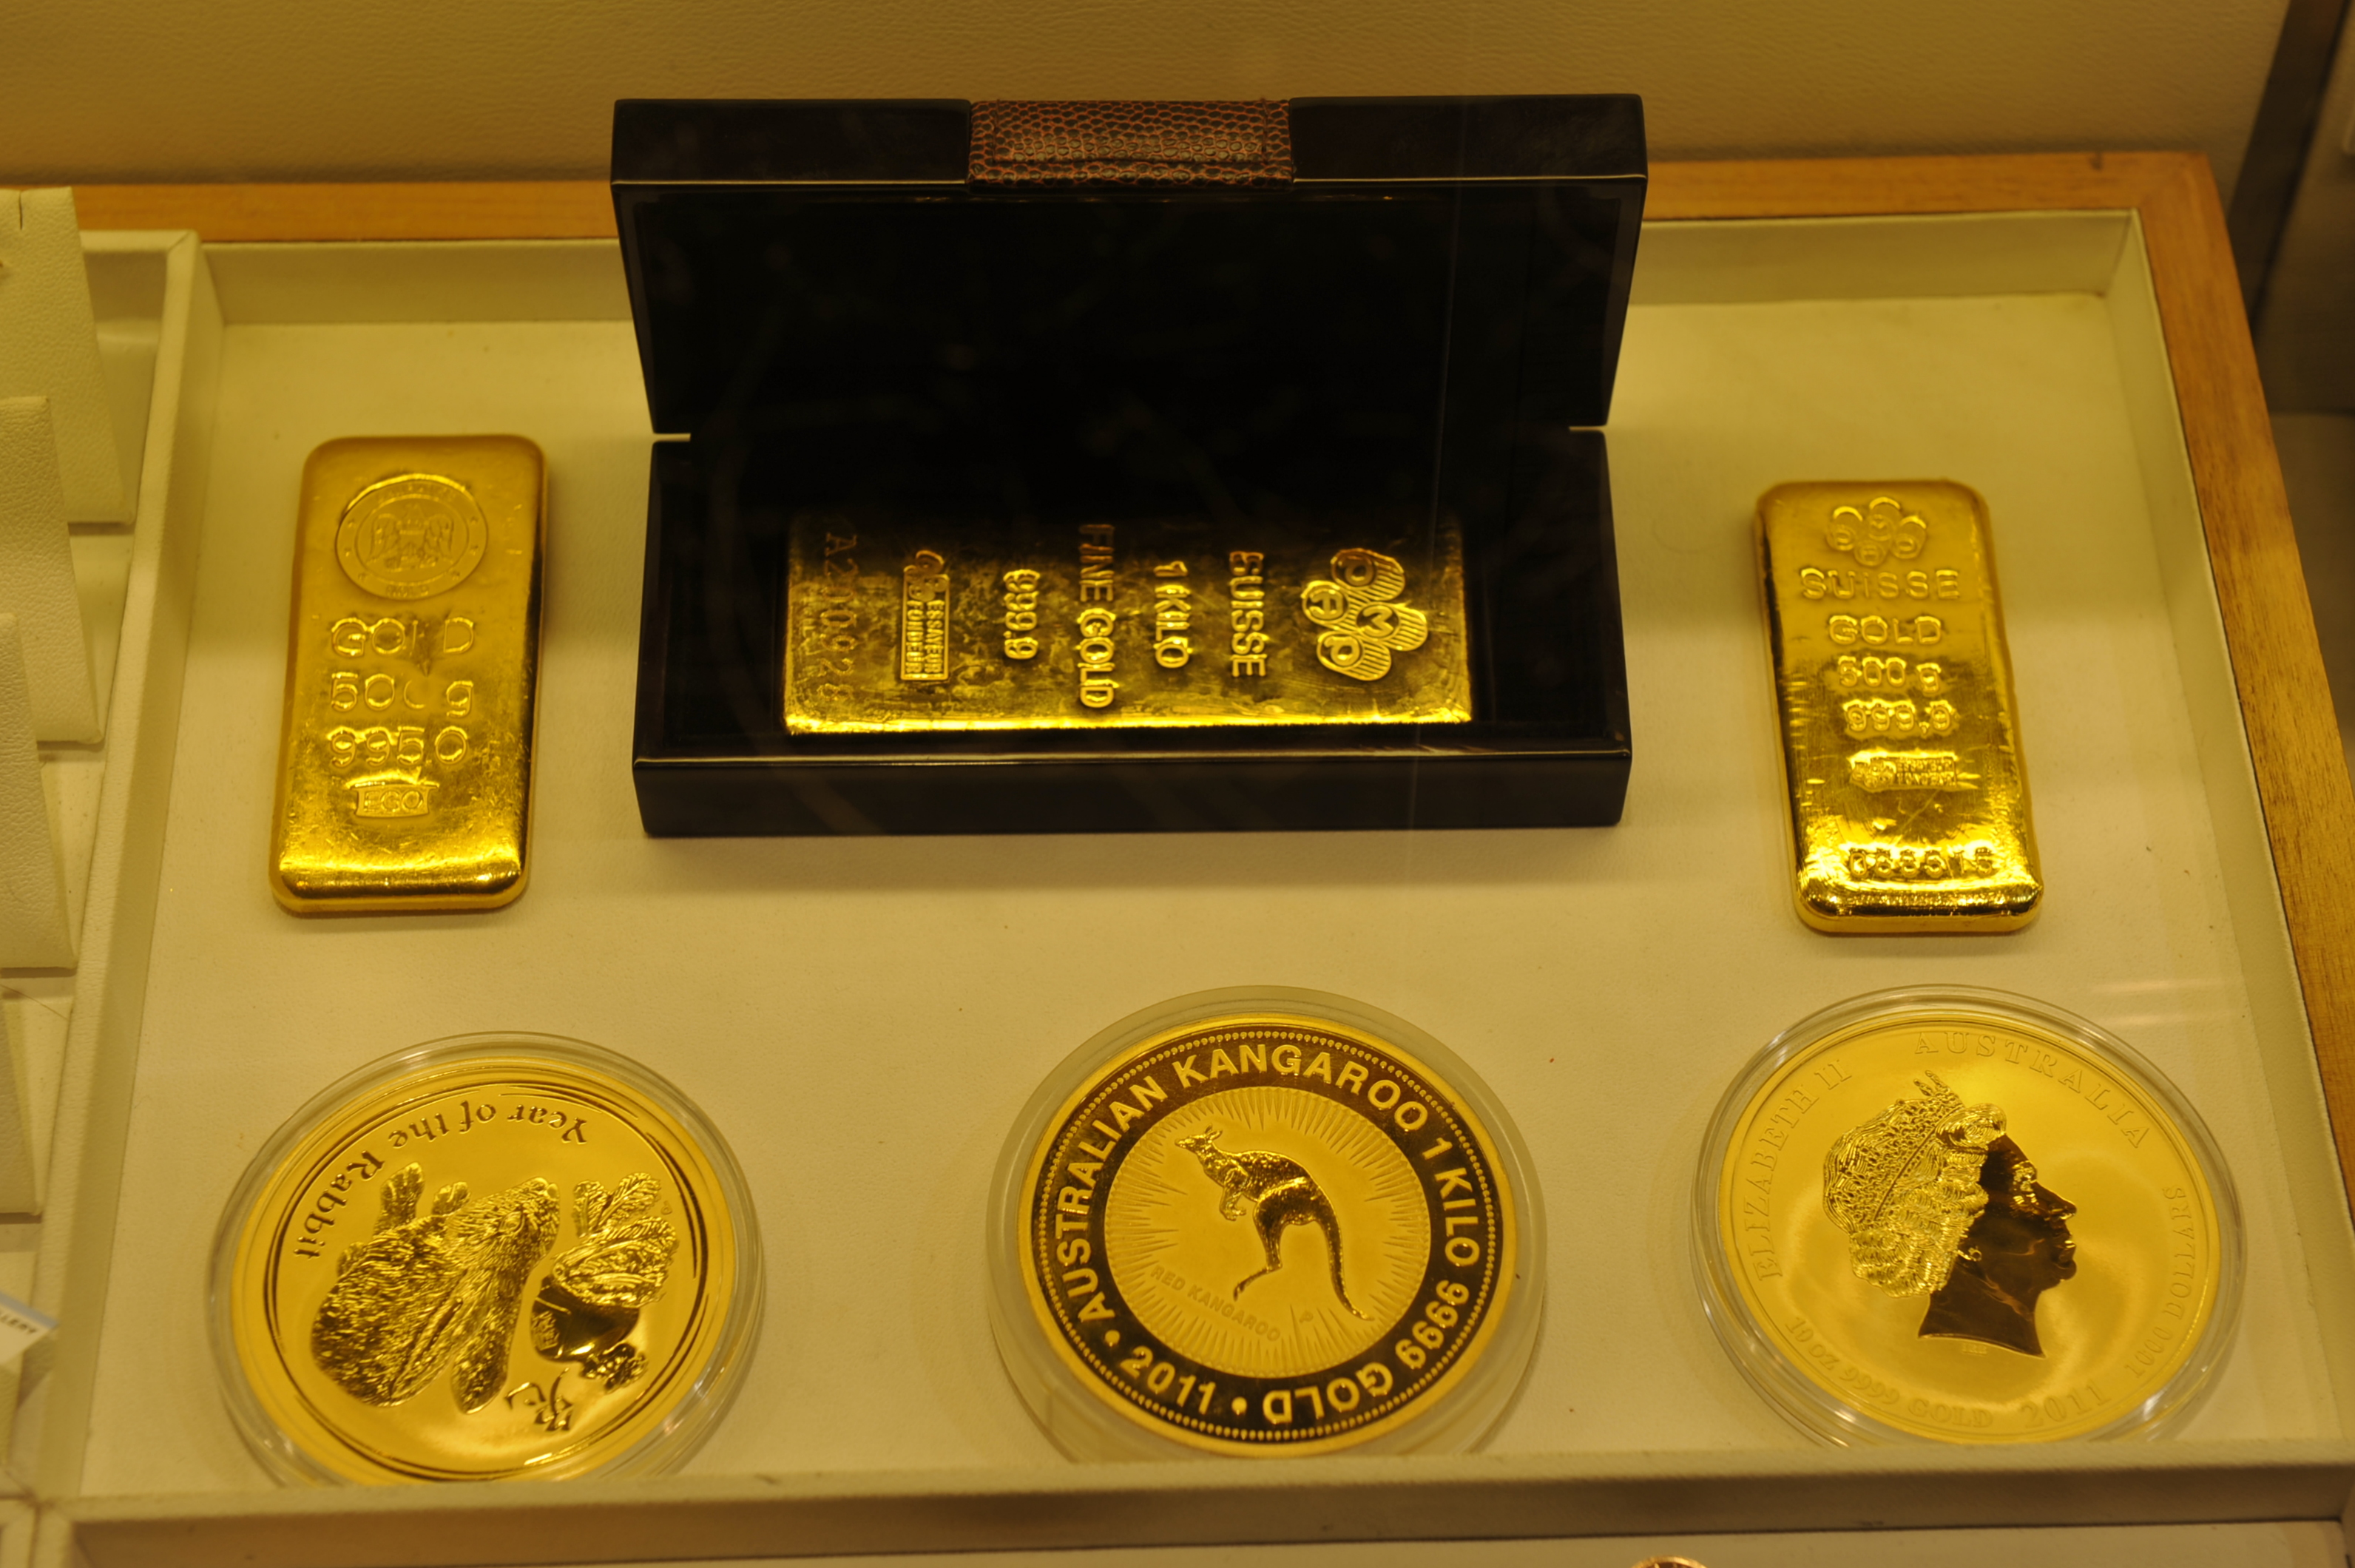 Gold bars or coins.